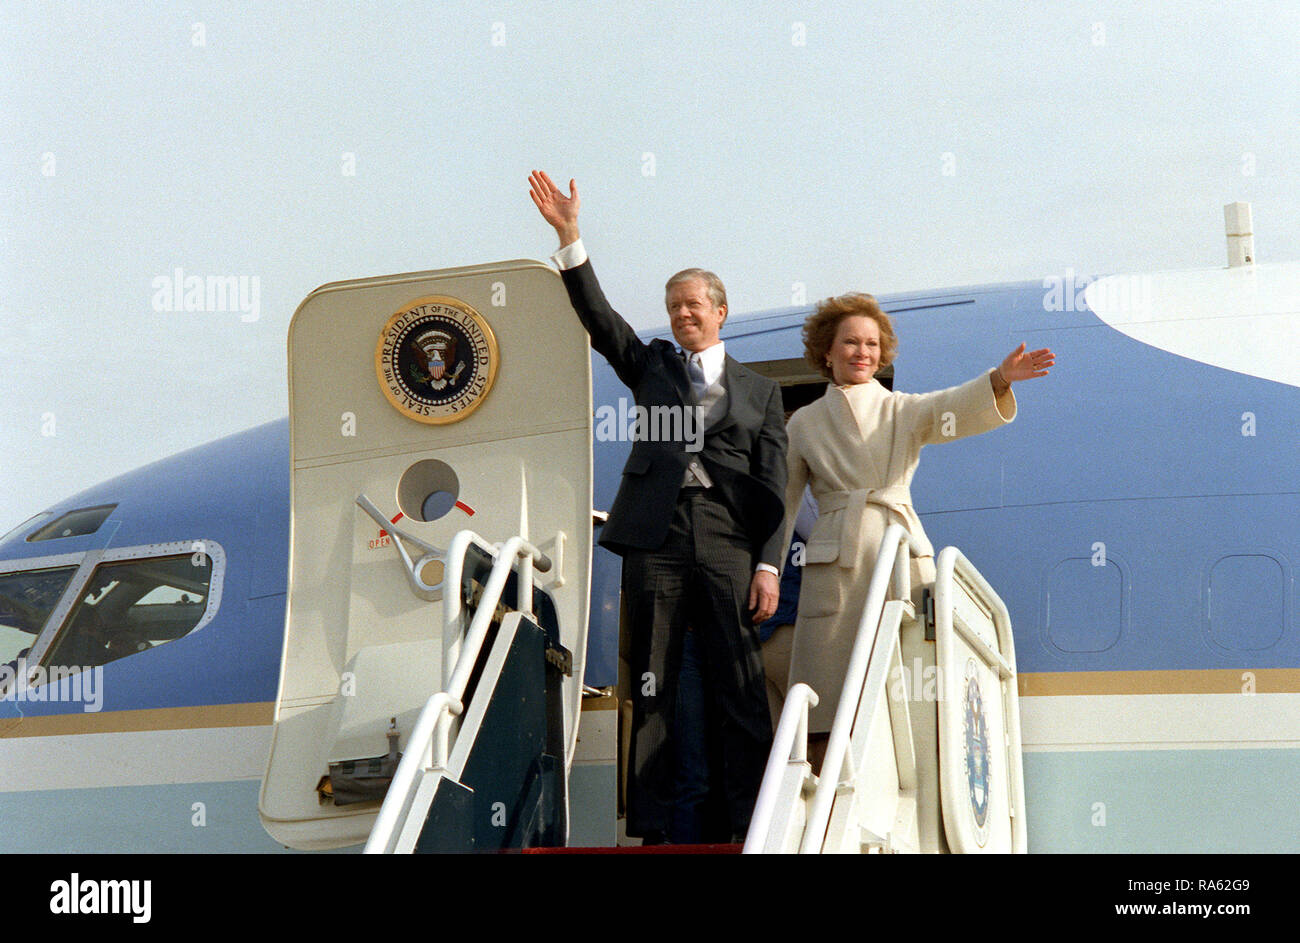 1981 - Former President Jimmy Carter and his wife Rosalynn, wave from the top of the aircraft steps as they depart  Andrews Air Force Base at the conclusion of President Ronald Reagan's inauguration ceremony. Stock Photo